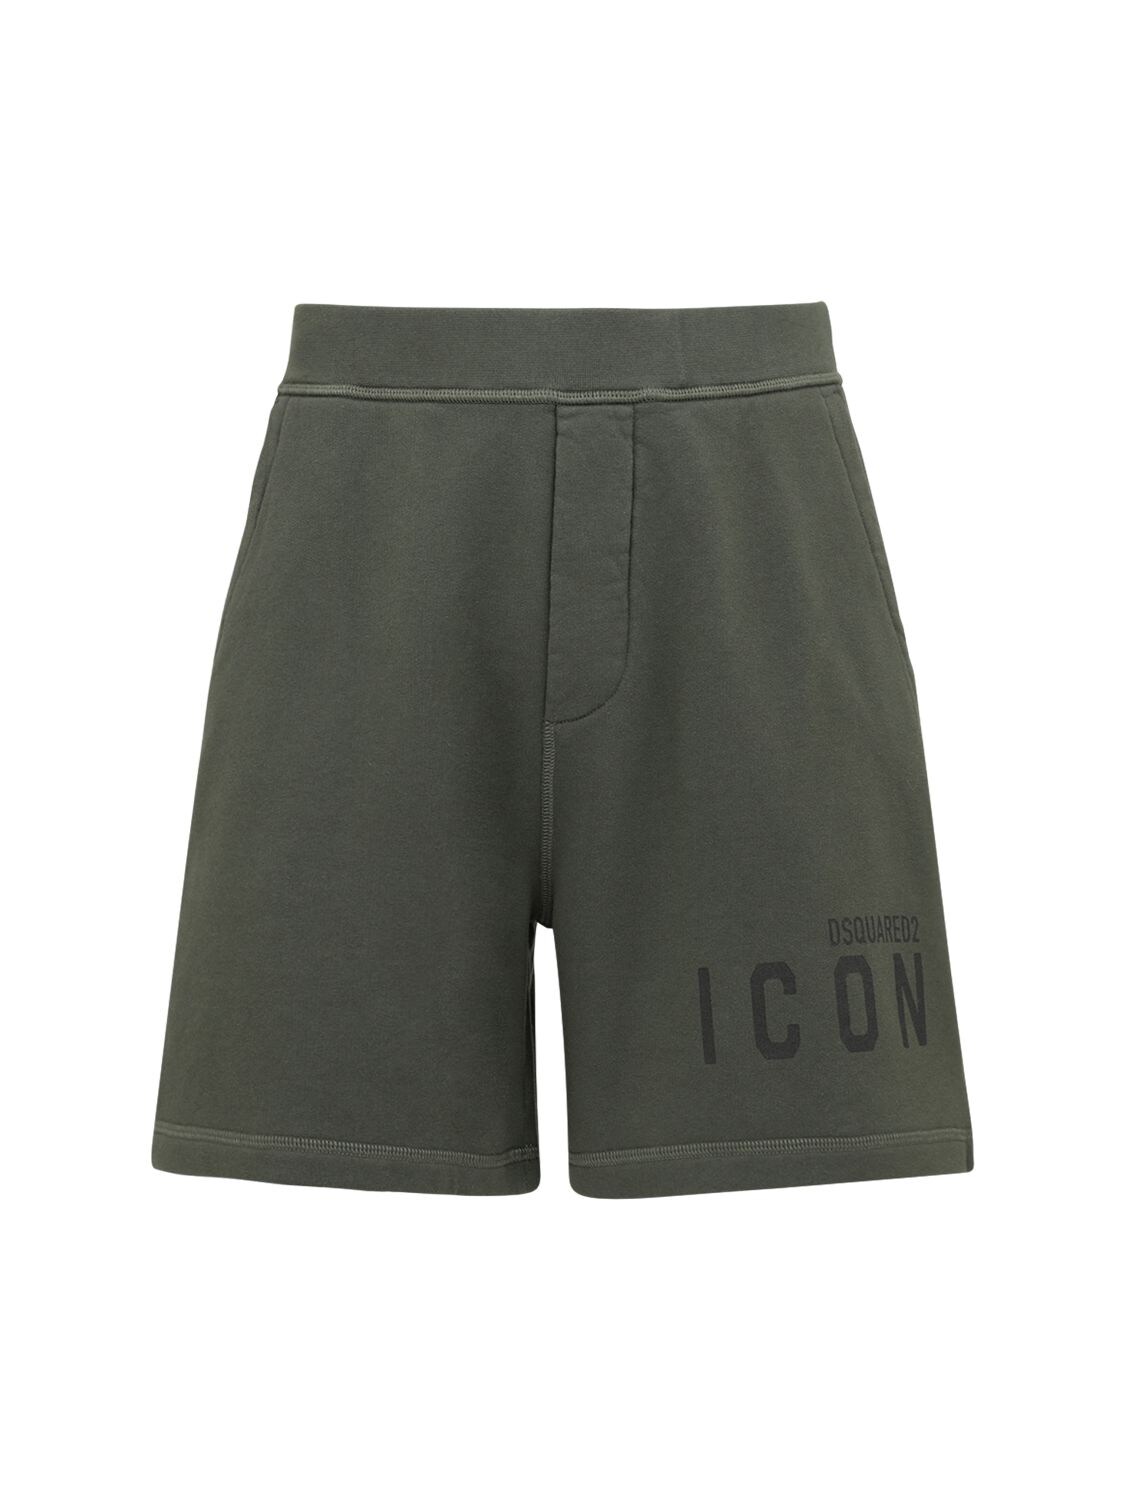 DSQUARED2 ICON LOGO PRINT COTTON SWEAT SHORTS,72IS3C011-ODE00